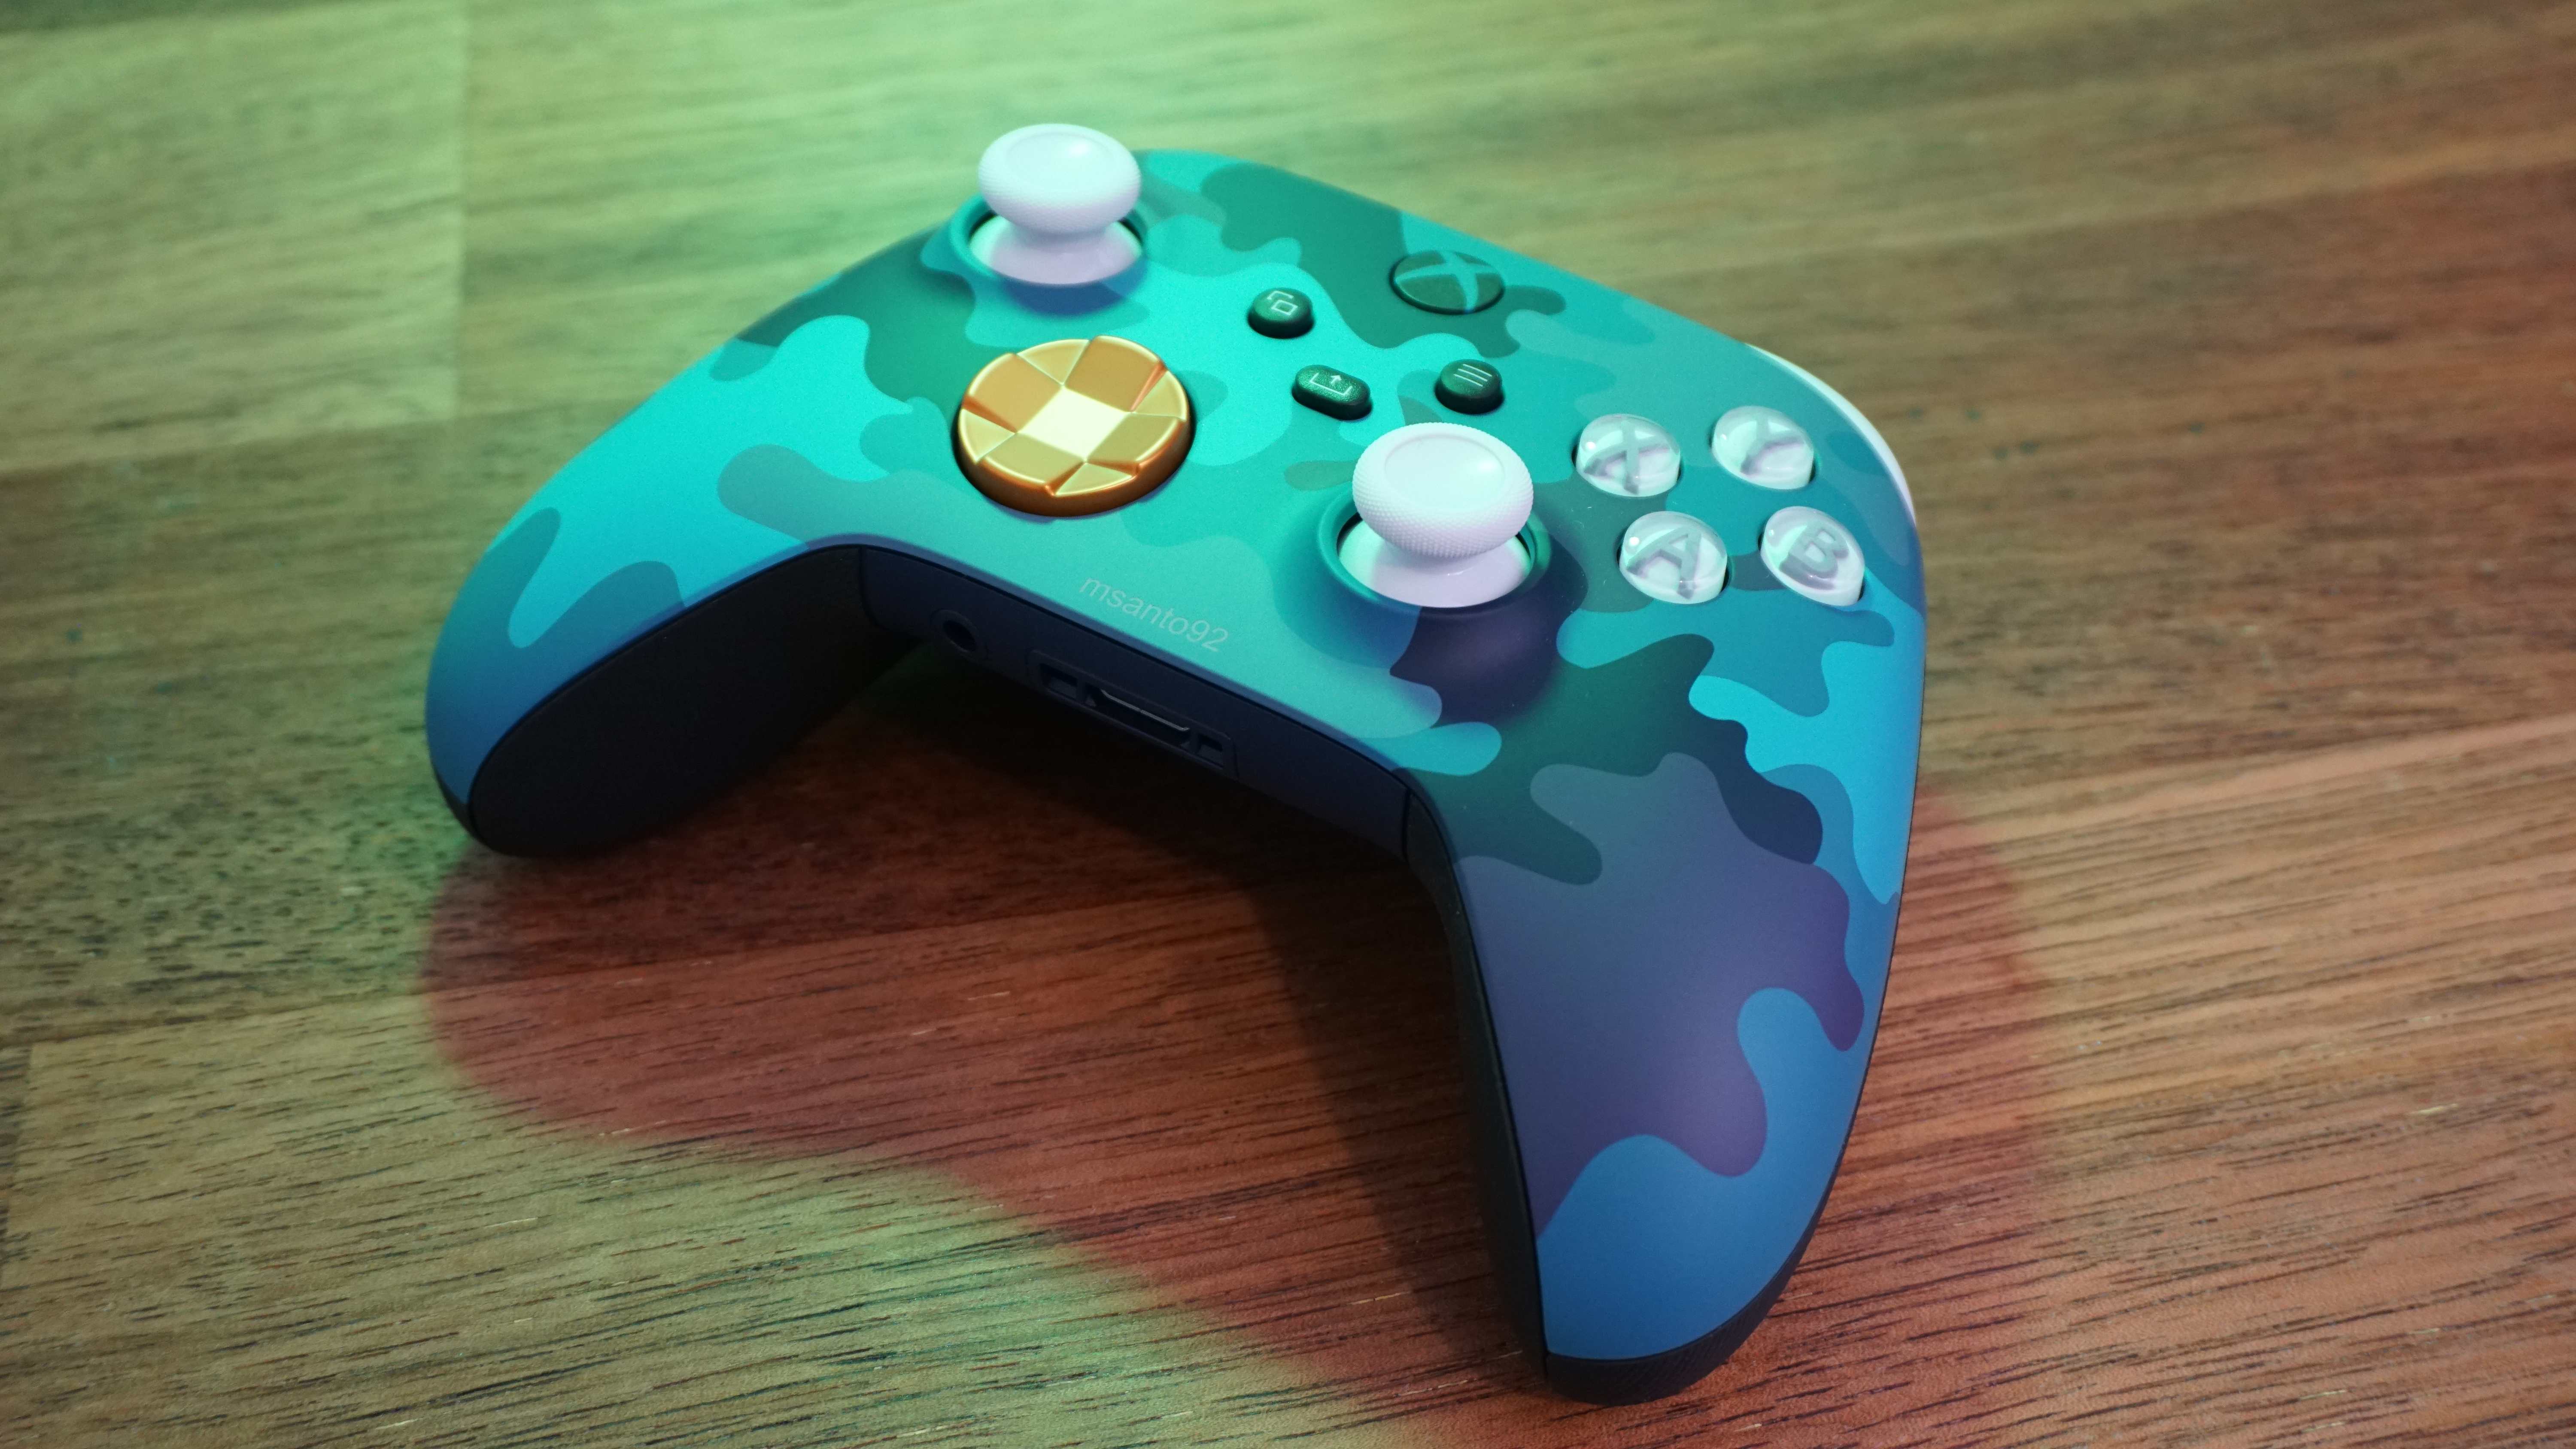 The Xbox Elite Series 2 controller is now customizable in Design Lab